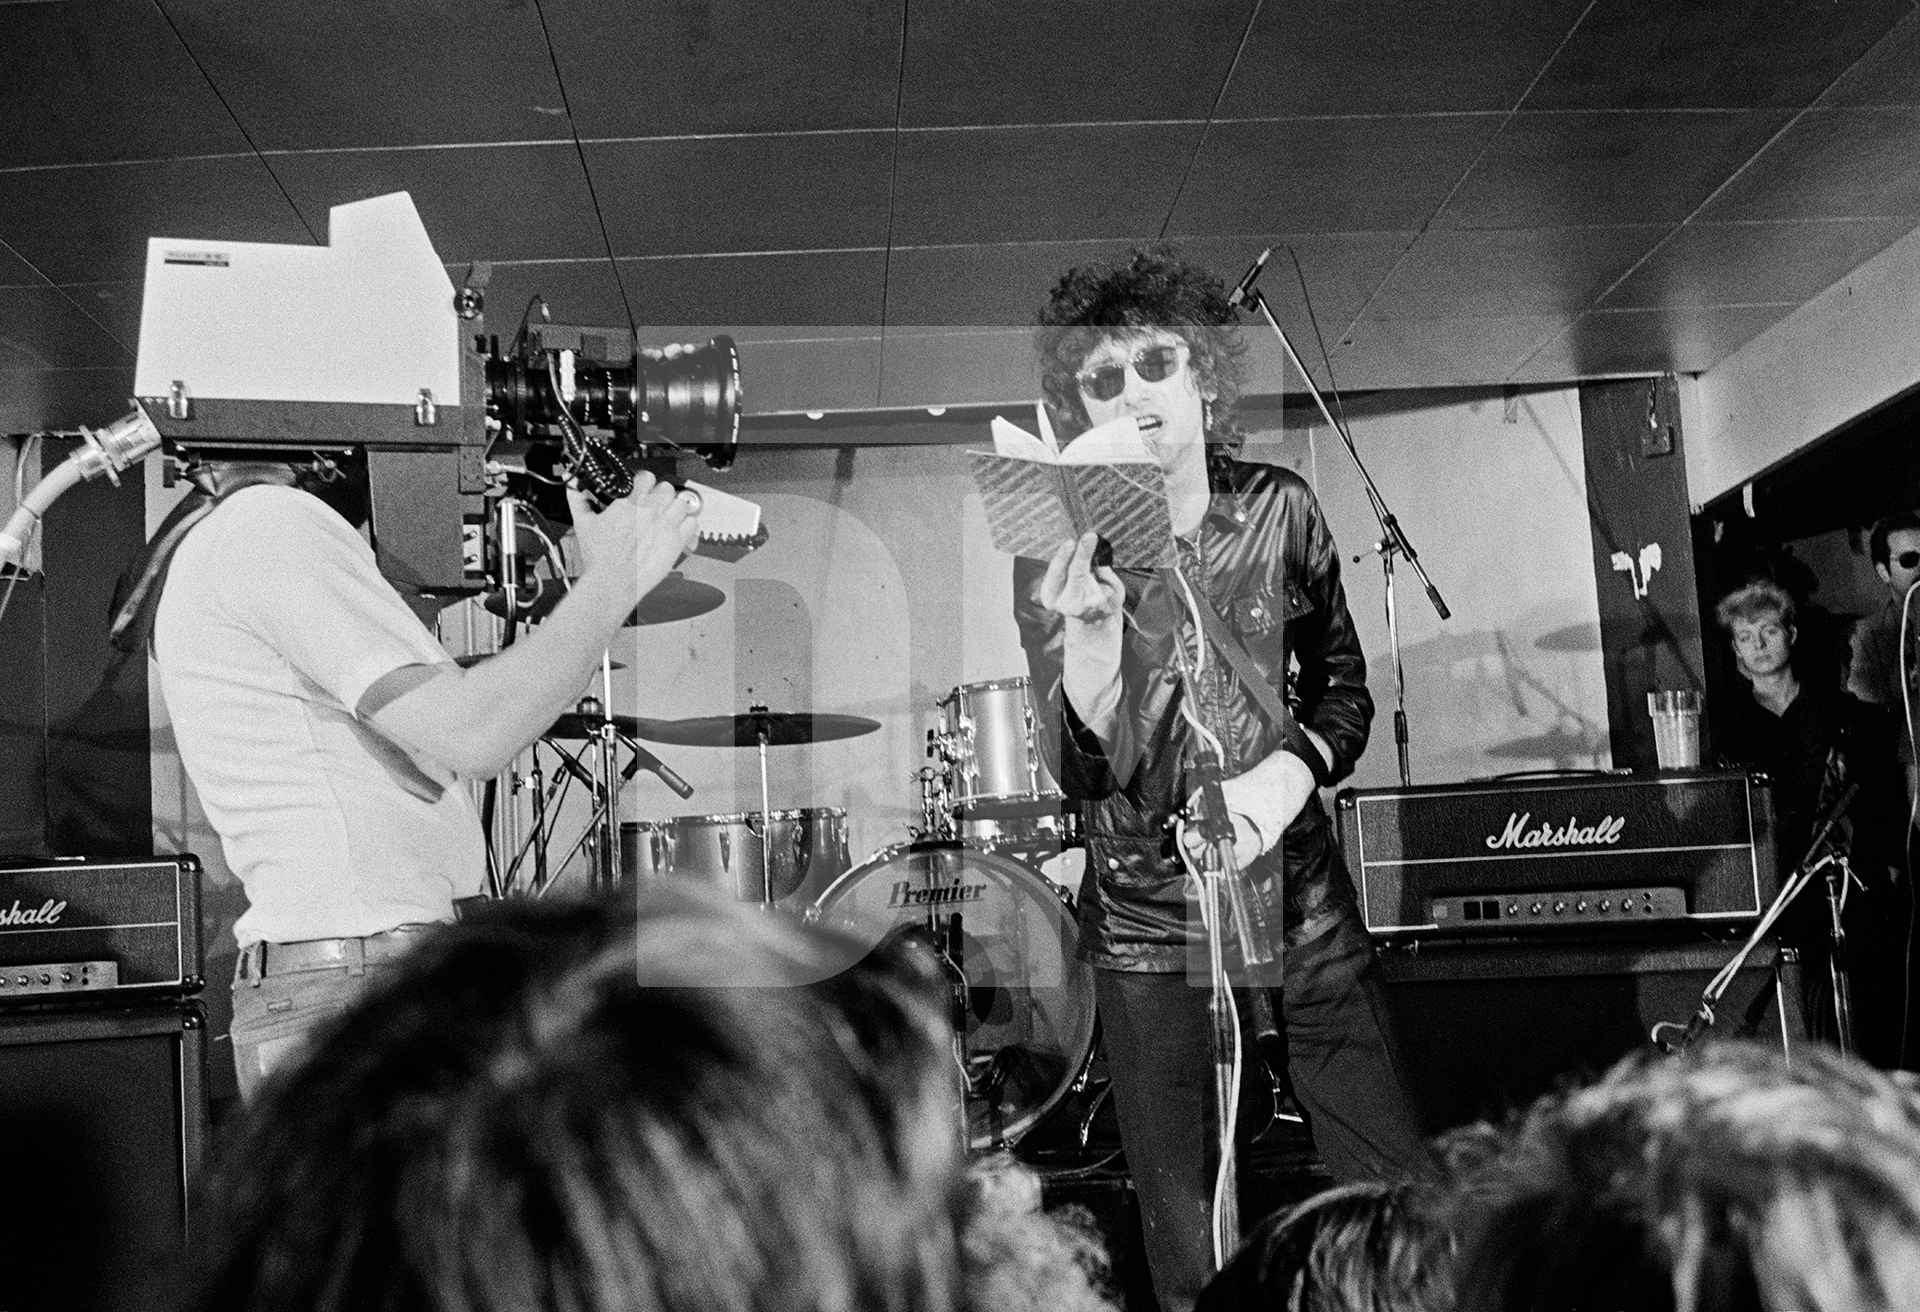 John Cooper Clarke at the Russell Club, Hulme, for a ‘Factory’ night. 'What's On' programme from Granada TV on location. April 1979 by Daniel Meadows